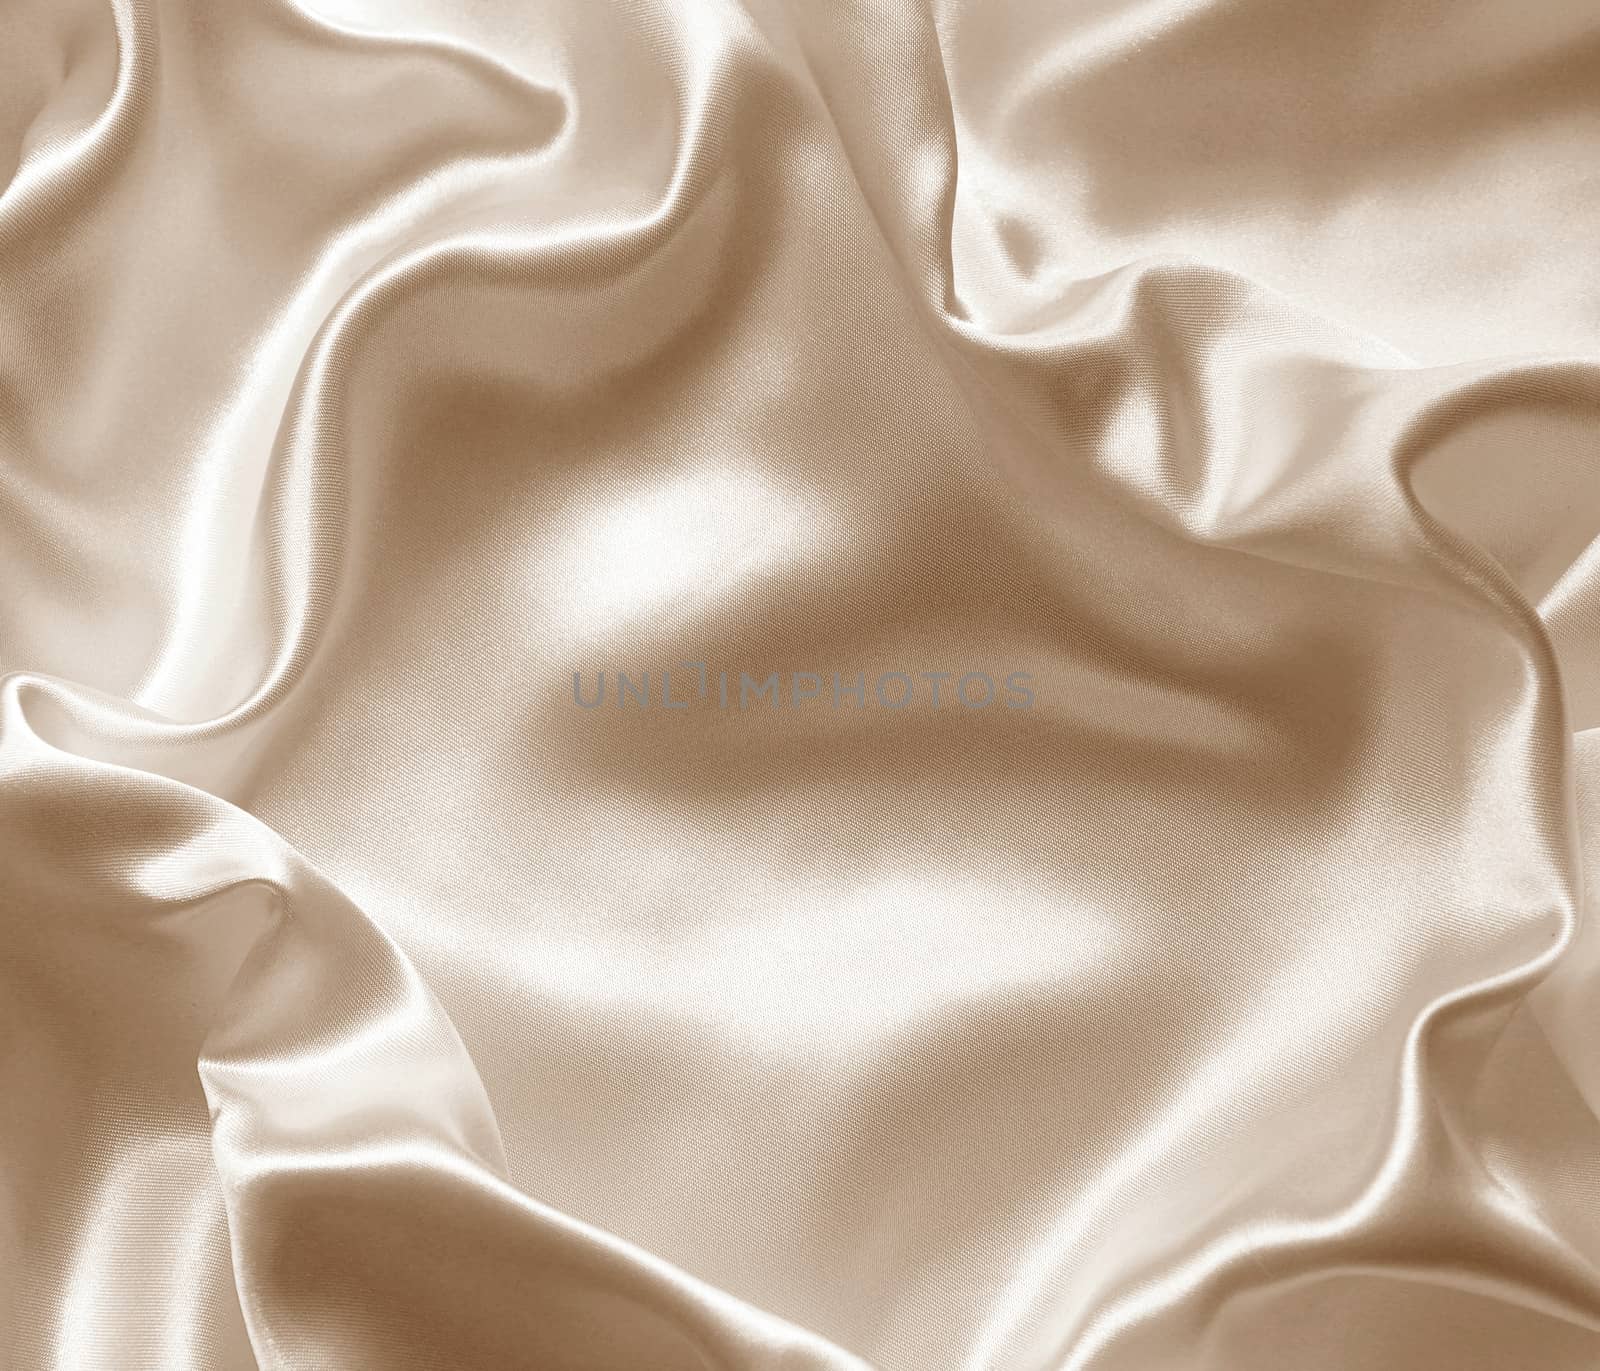 Smooth elegant golden silk as wedding background. In Sepia toned by oxanatravel